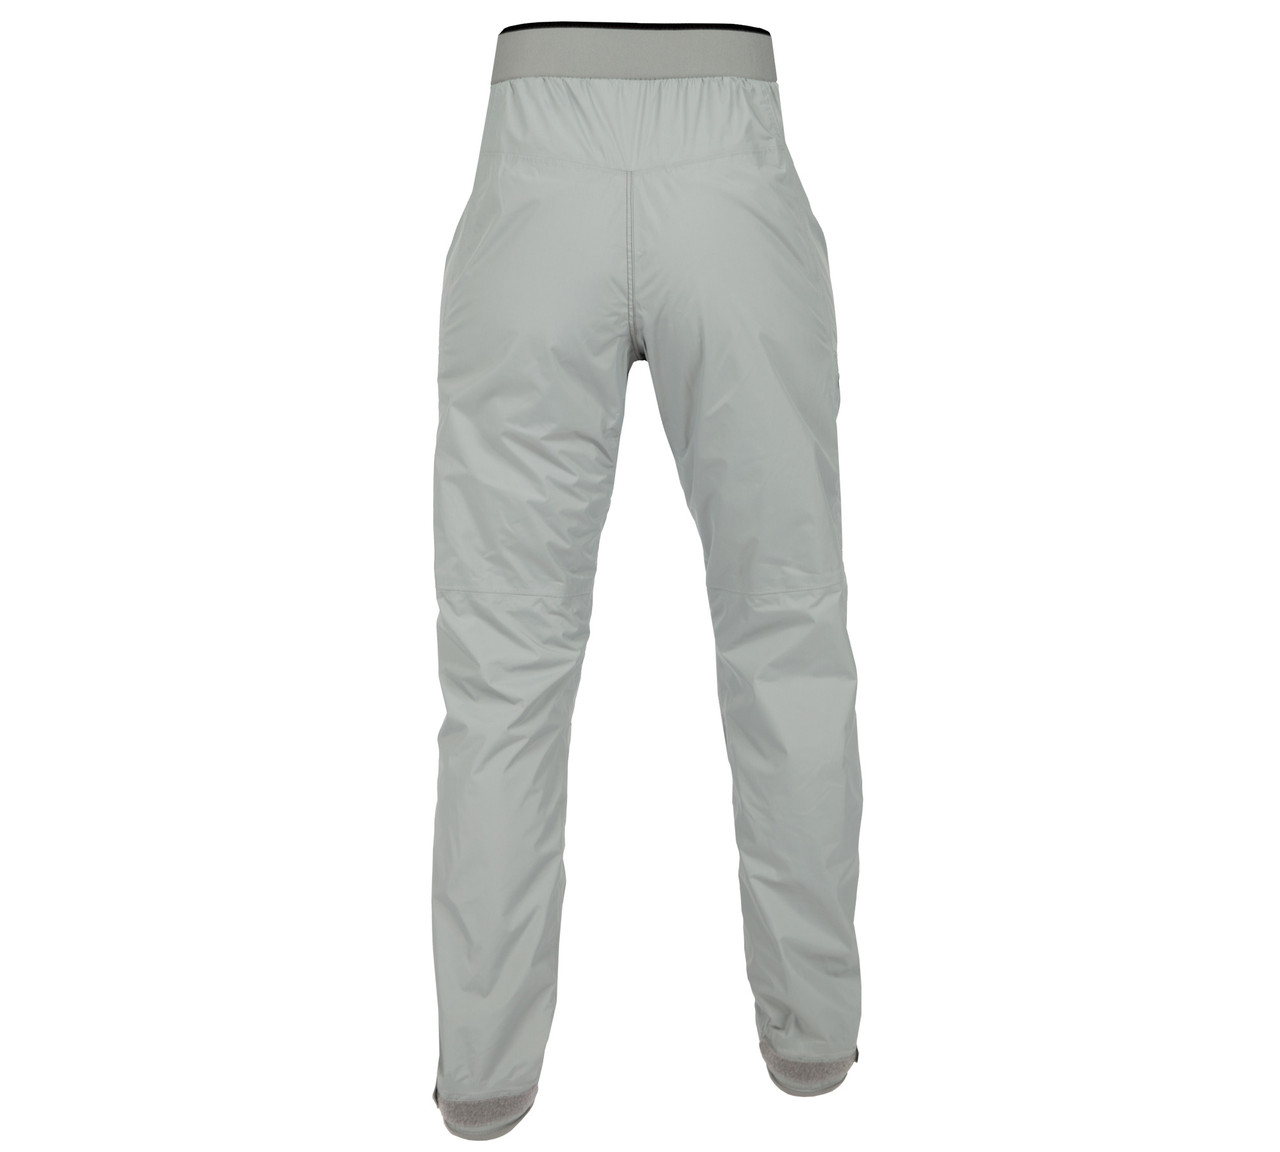 https://cdn11.bigcommerce.com/s-2y1g1tdlub/images/stencil/1280x1280/products/2945/3094/ptwstplg-hydrus_25-stance_pant-womens-light_gray-back__52060.1674839445.jpg?c=1